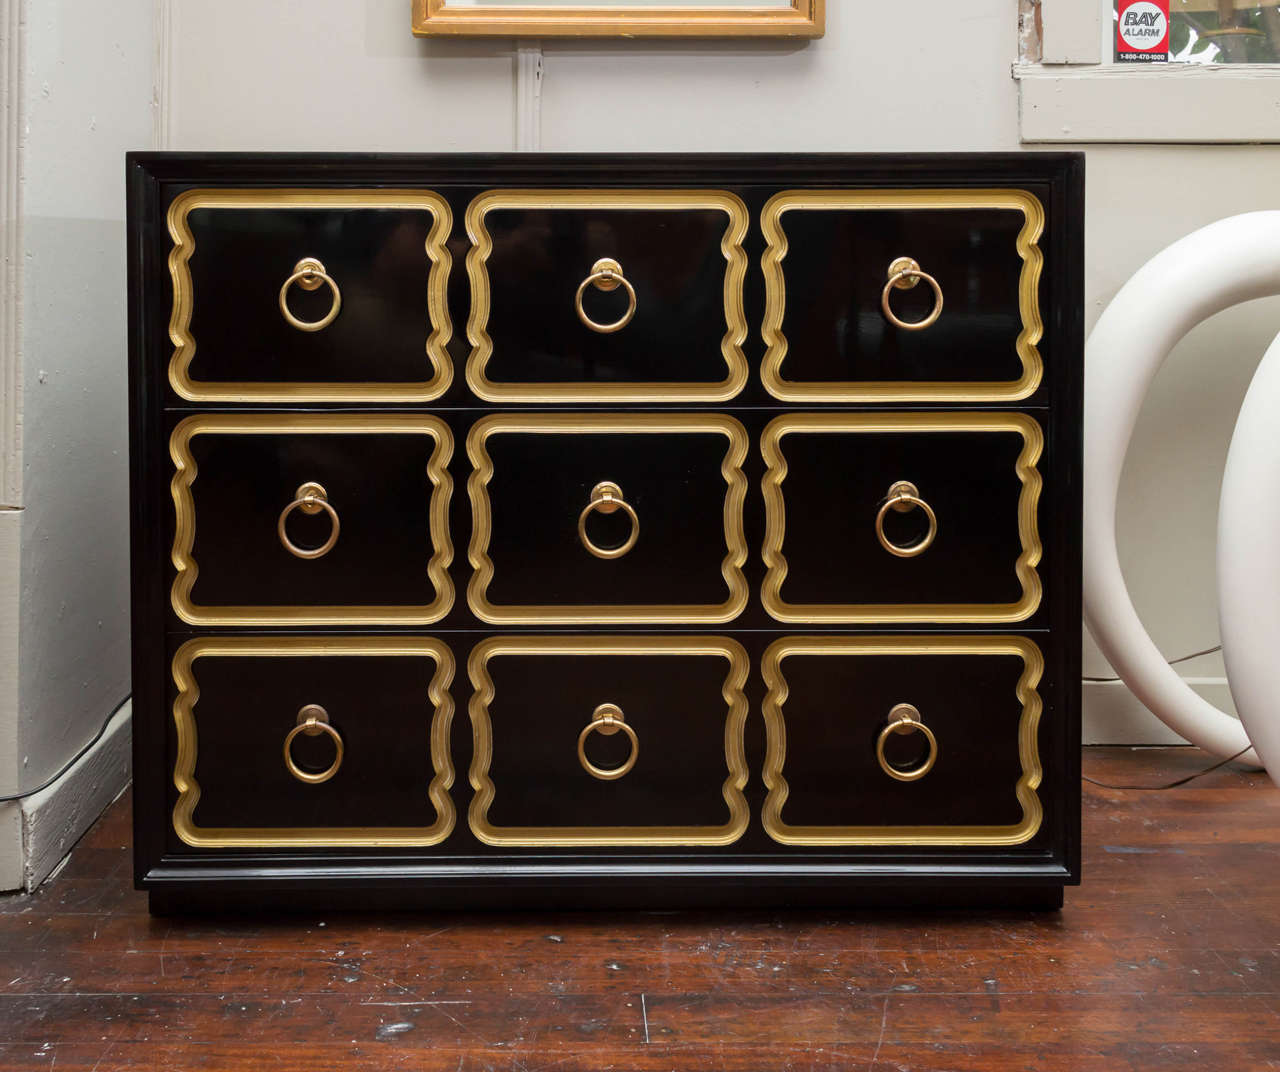 Dorothy Draper design Espana chest of drawers for Heritage Henredon.
Perfectly re-lacquered with refreshed interiors, labeled.